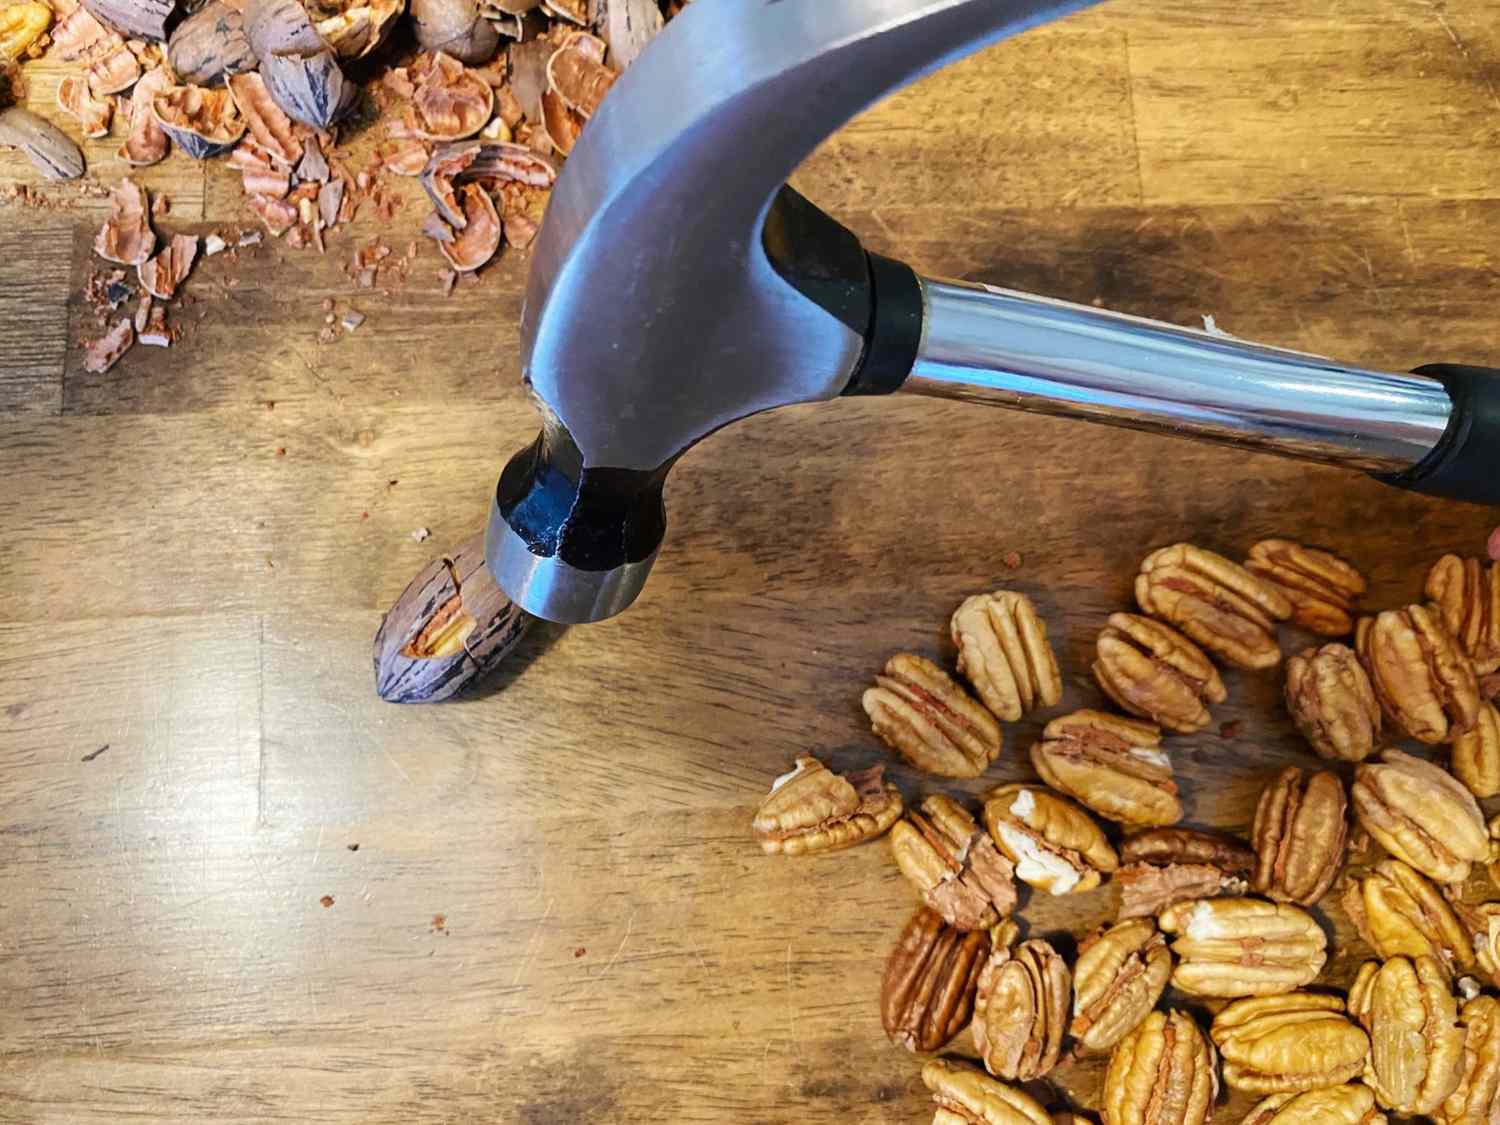 Cracking pecan with hammer